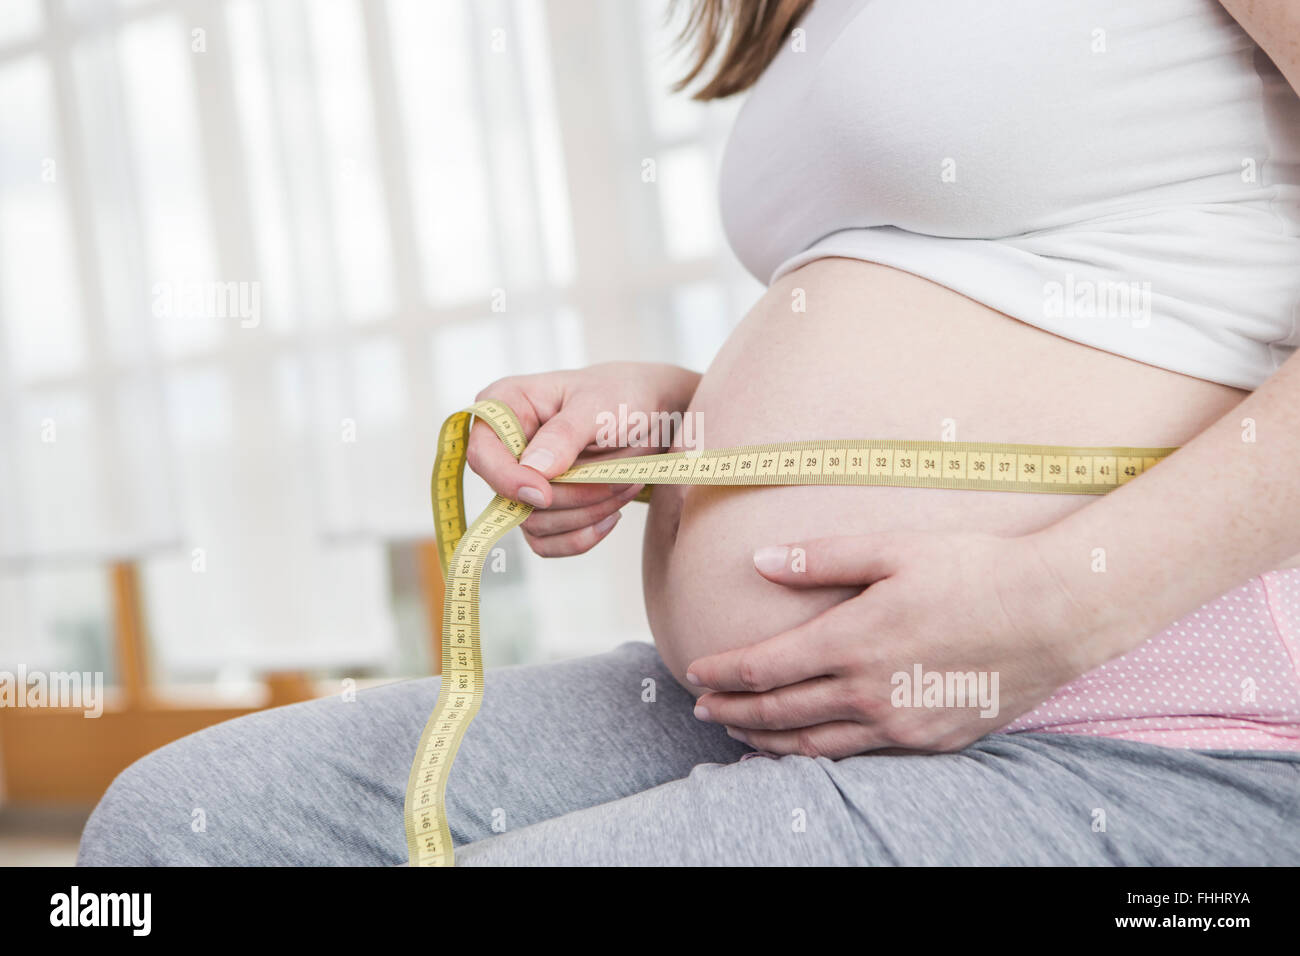 Pregnant woman measuring her belly circumference Stock Photo